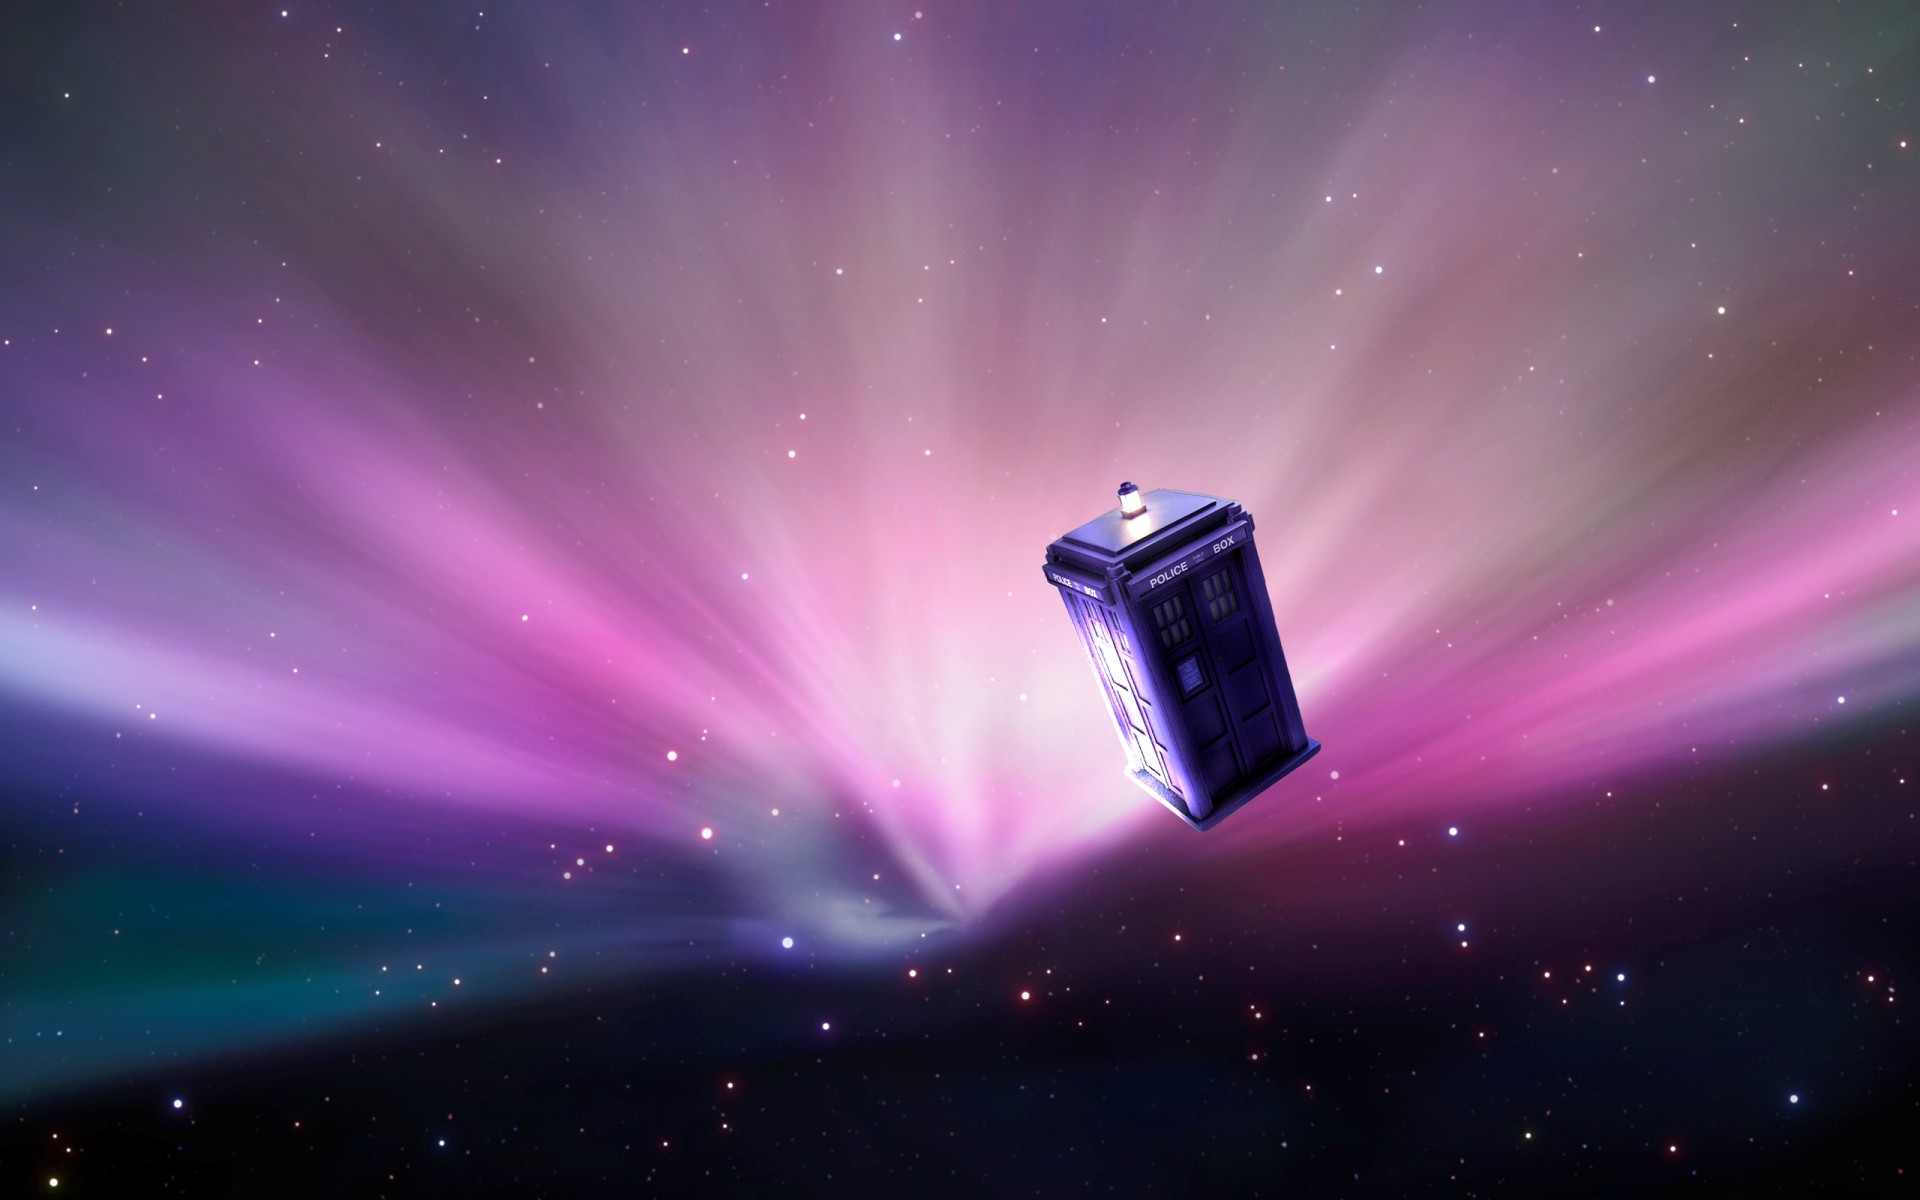 Top Collection of Doctor Who Tardis Wallpapers Doctor Who Tardis HD Wallpapers Pinterest Live wallpapers, Wallpaper and Wallpaper art